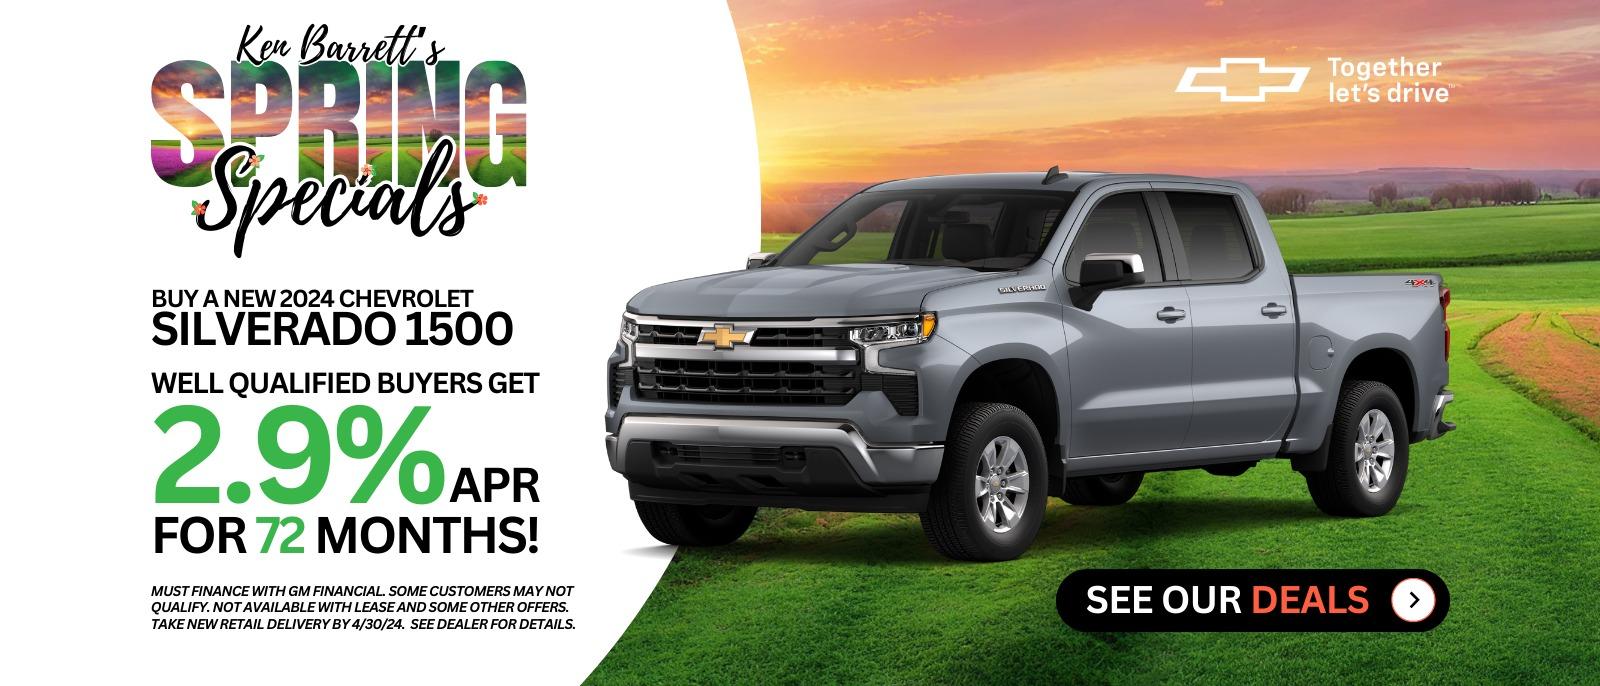 Ken Barrett's Spring Specials new deals on new Chevrolets in Batavia NY.  Find the Chevy deal for you.  Check out the new car deal on this brand new Chevrolet Silverado 1500